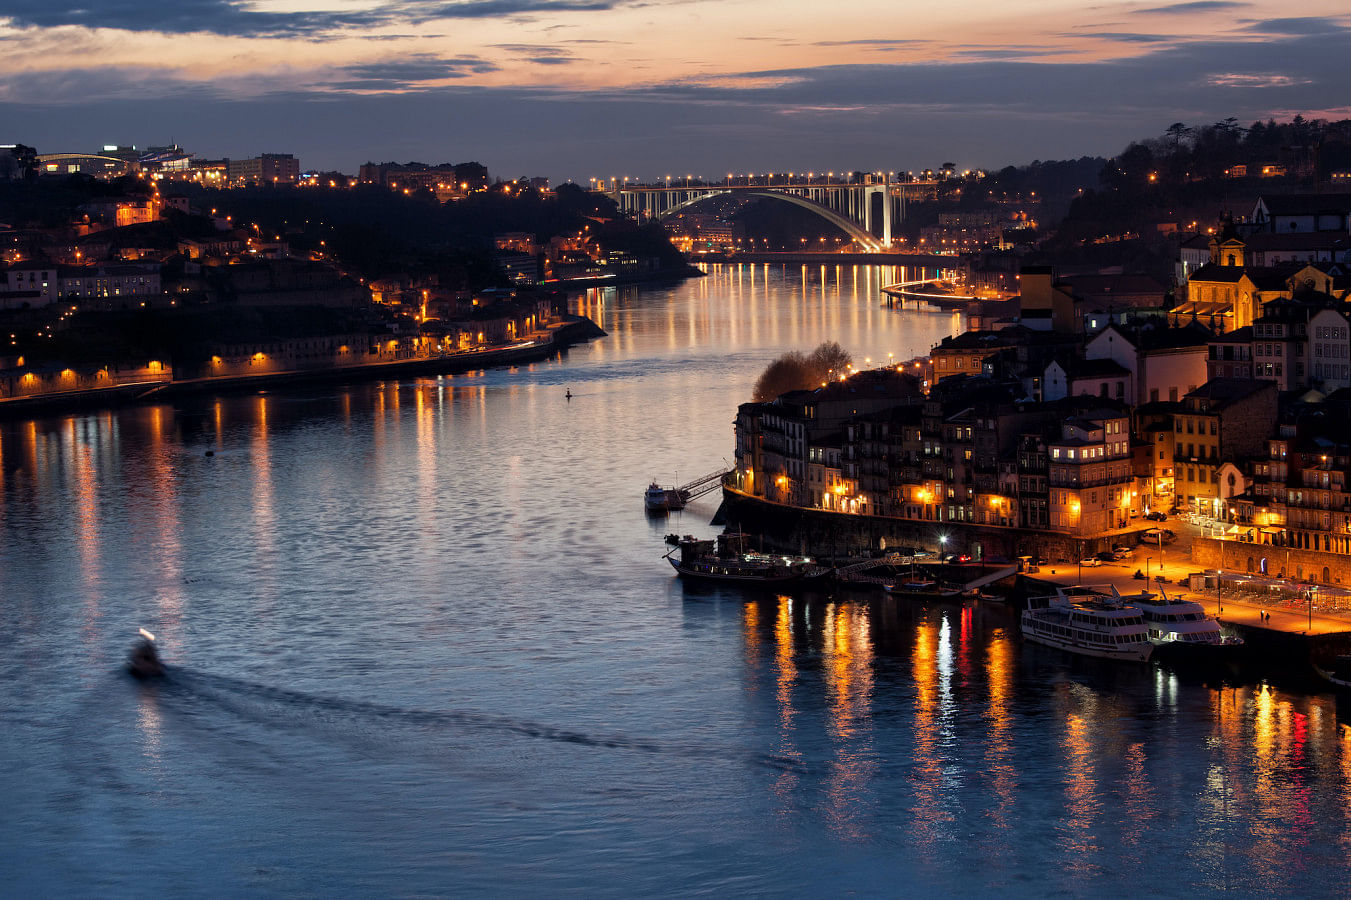 Rent a boat in Douro River